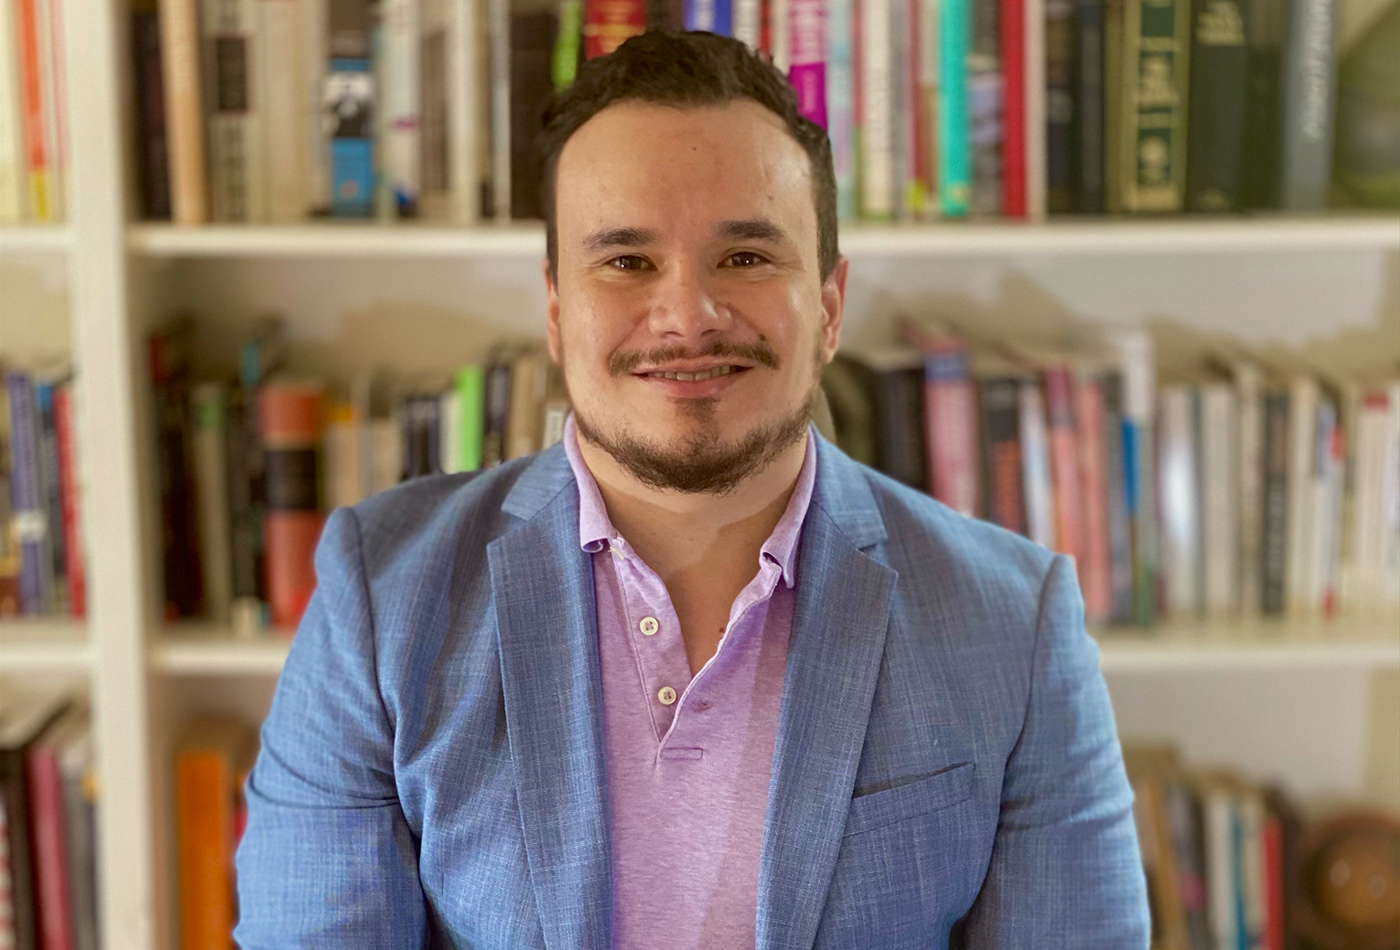 A man in a blazer smiles in front of a bookshelf.